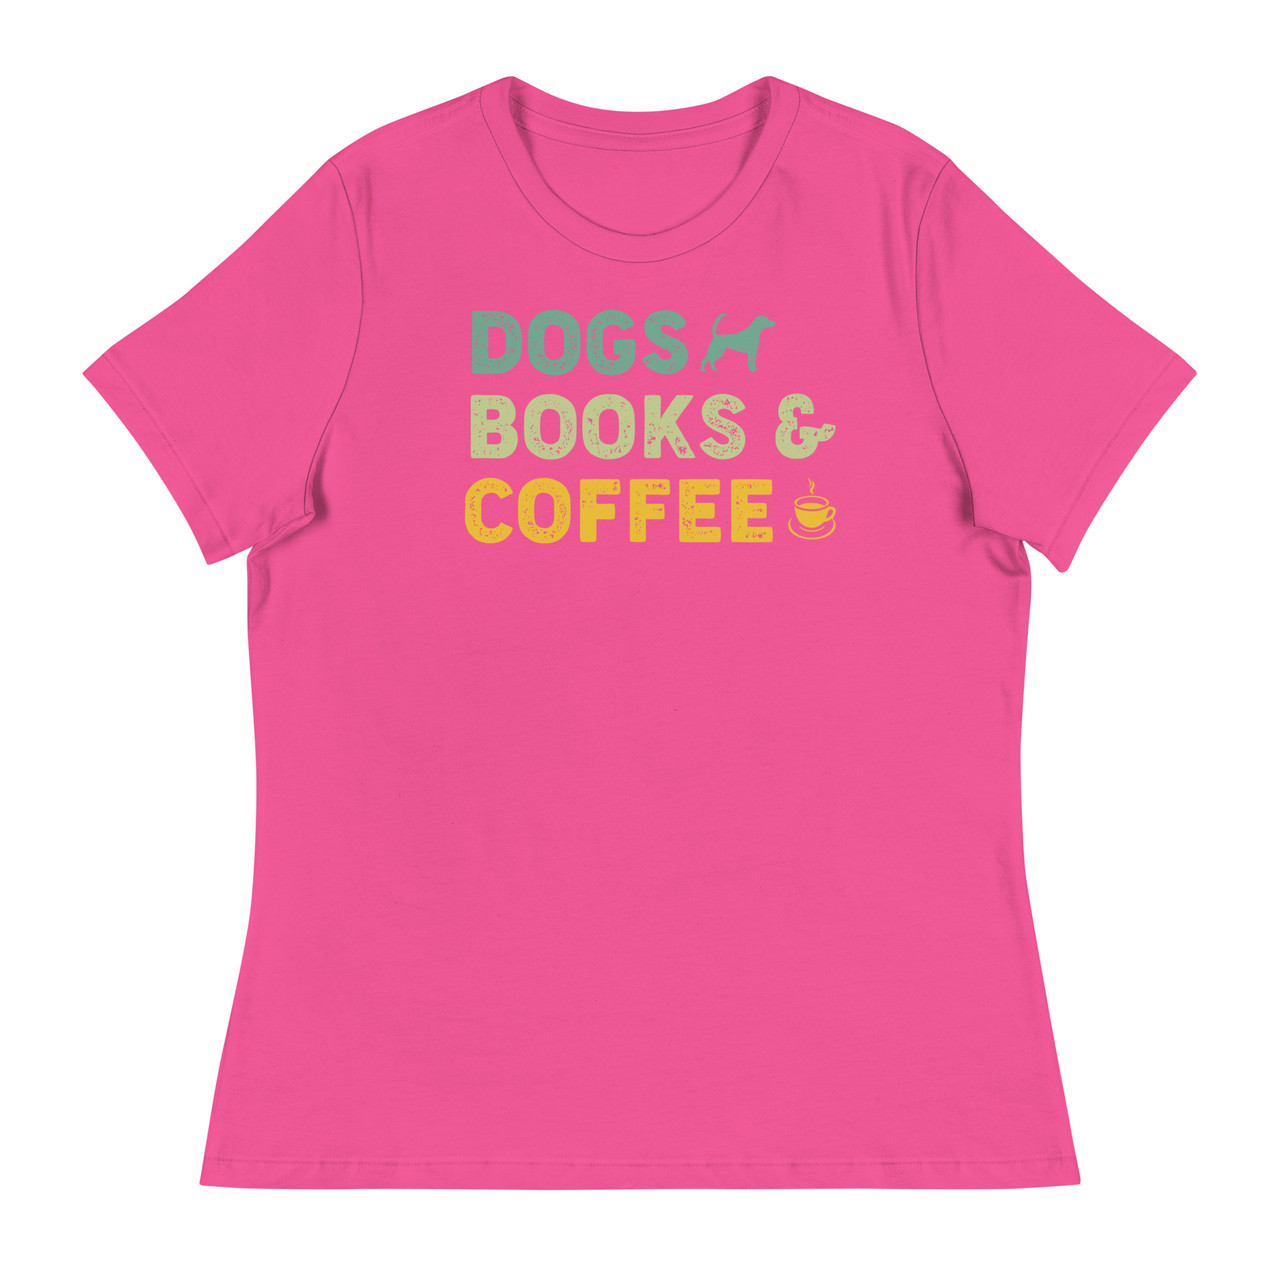 Dogs Books & Coffee Women's Relaxed T-Shirt - Bella + Canvas 6400 